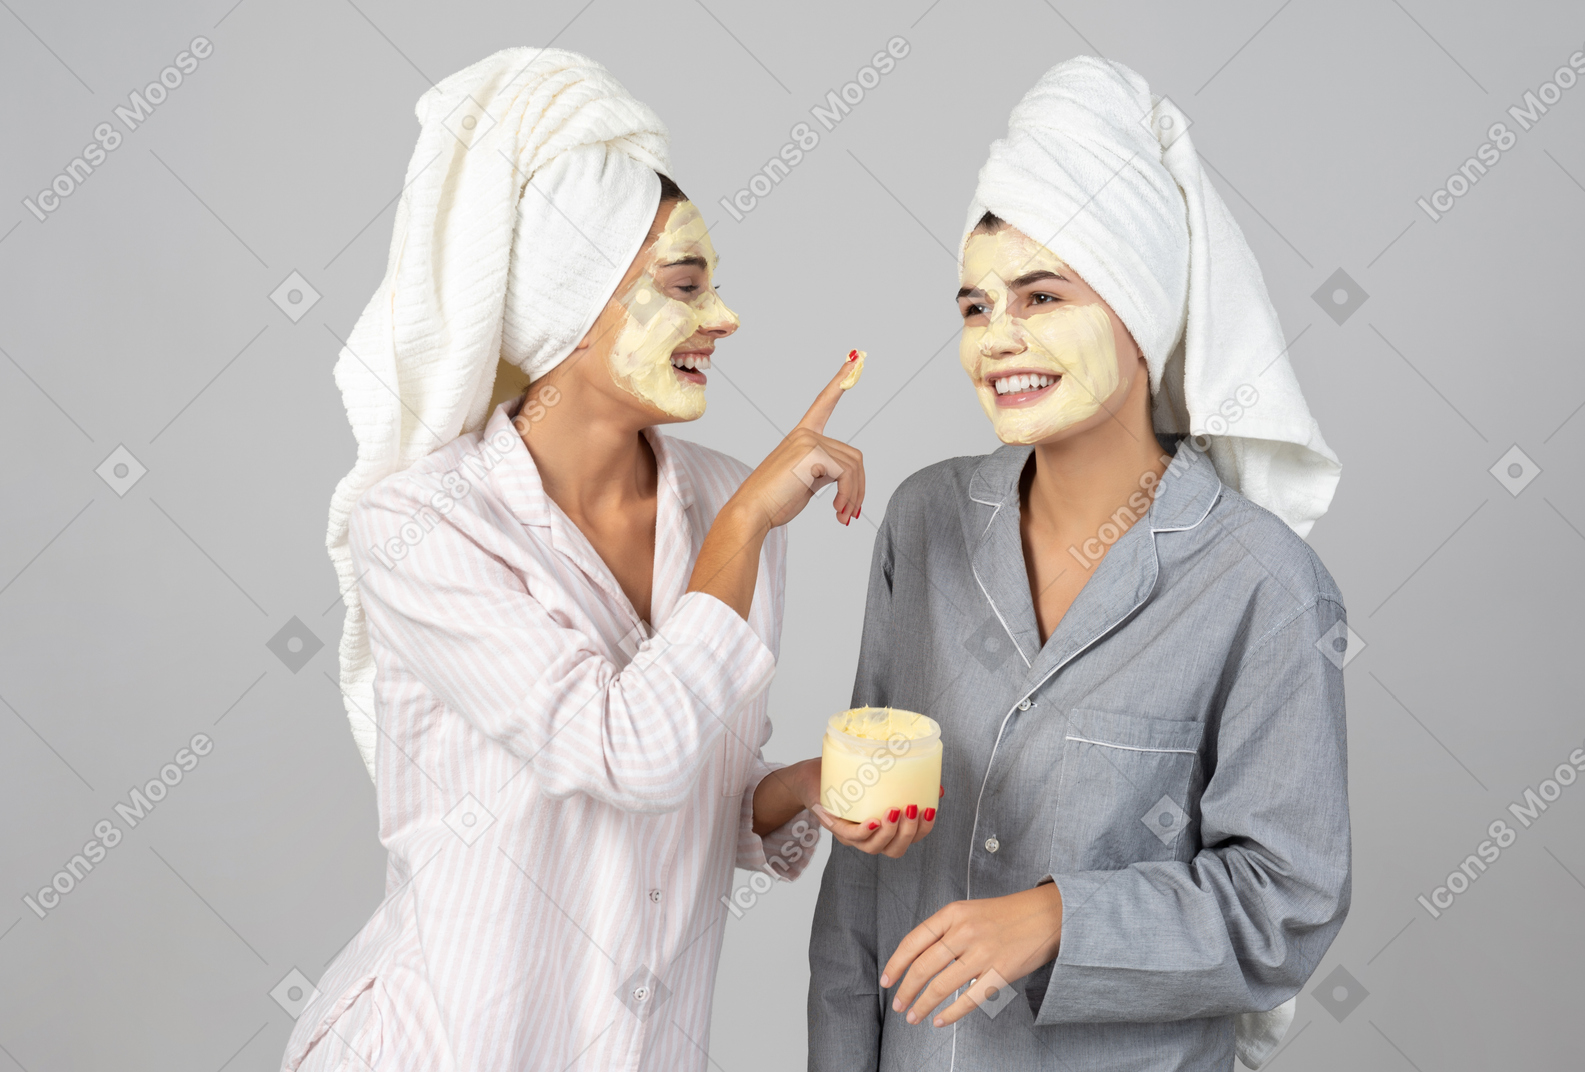 Beauty routine time just for us, girls